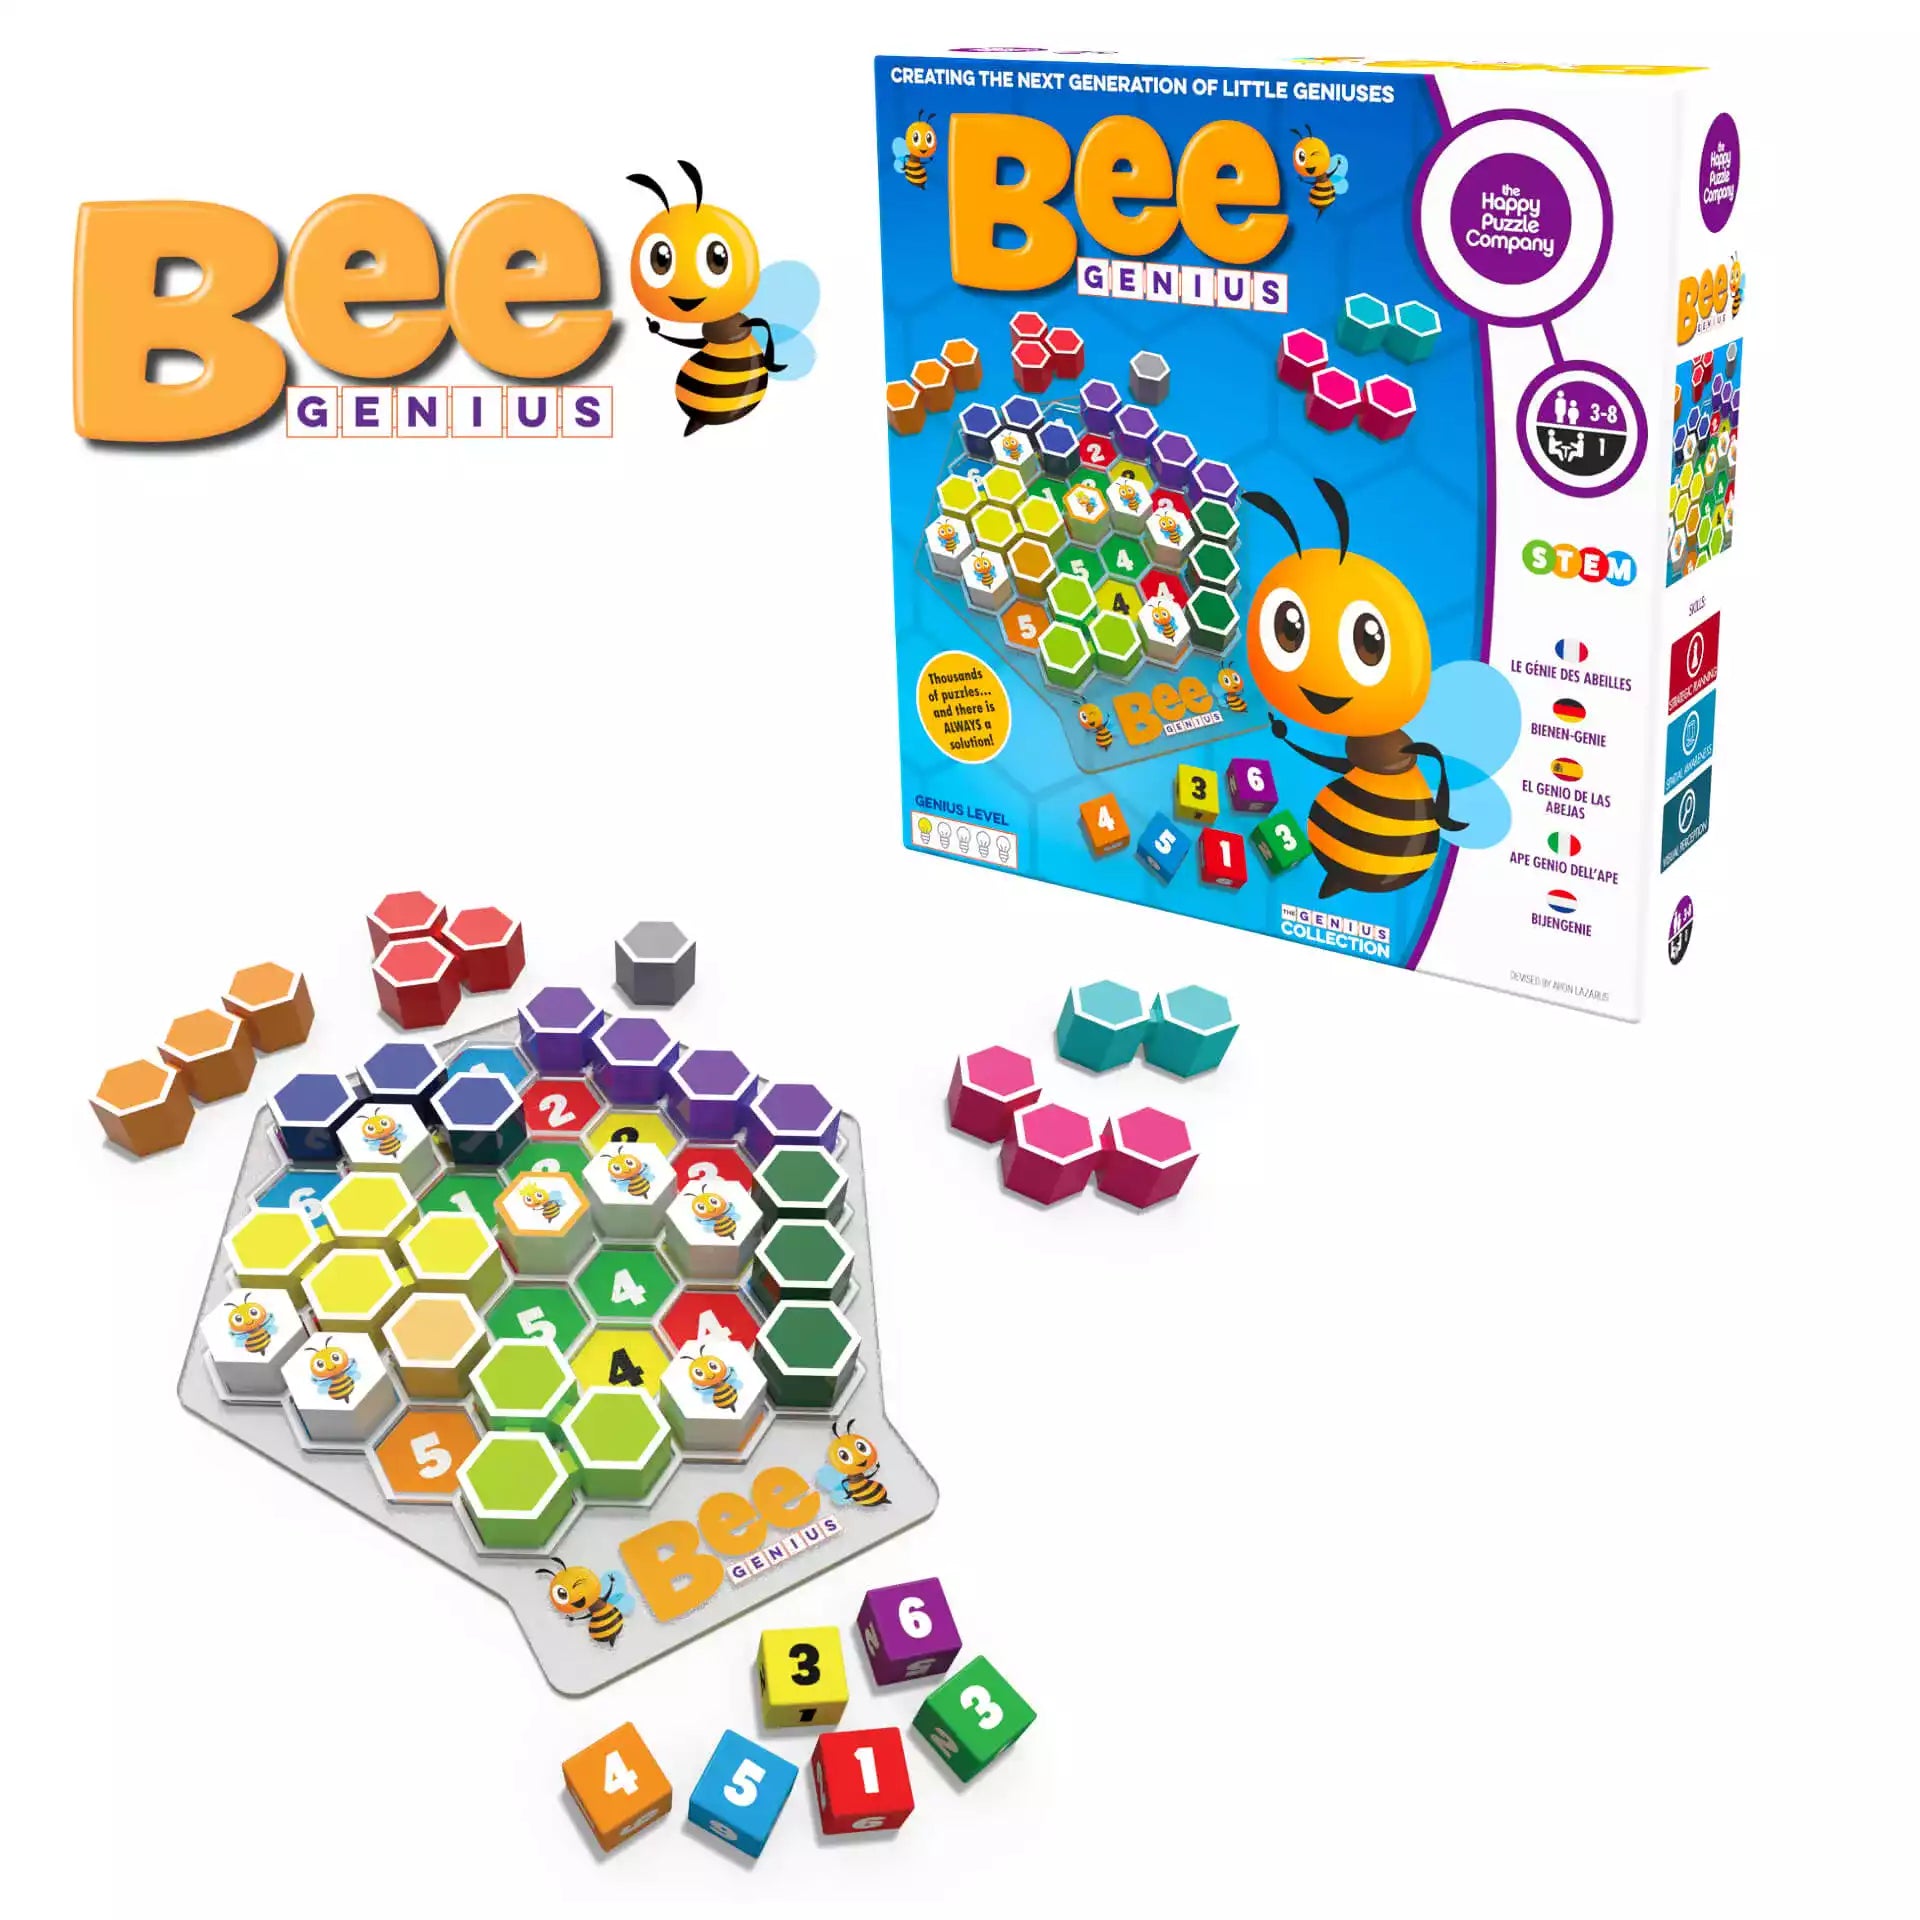 Bee Genius game - shop Happy Puzzle company toys - shop brainteasers for kids